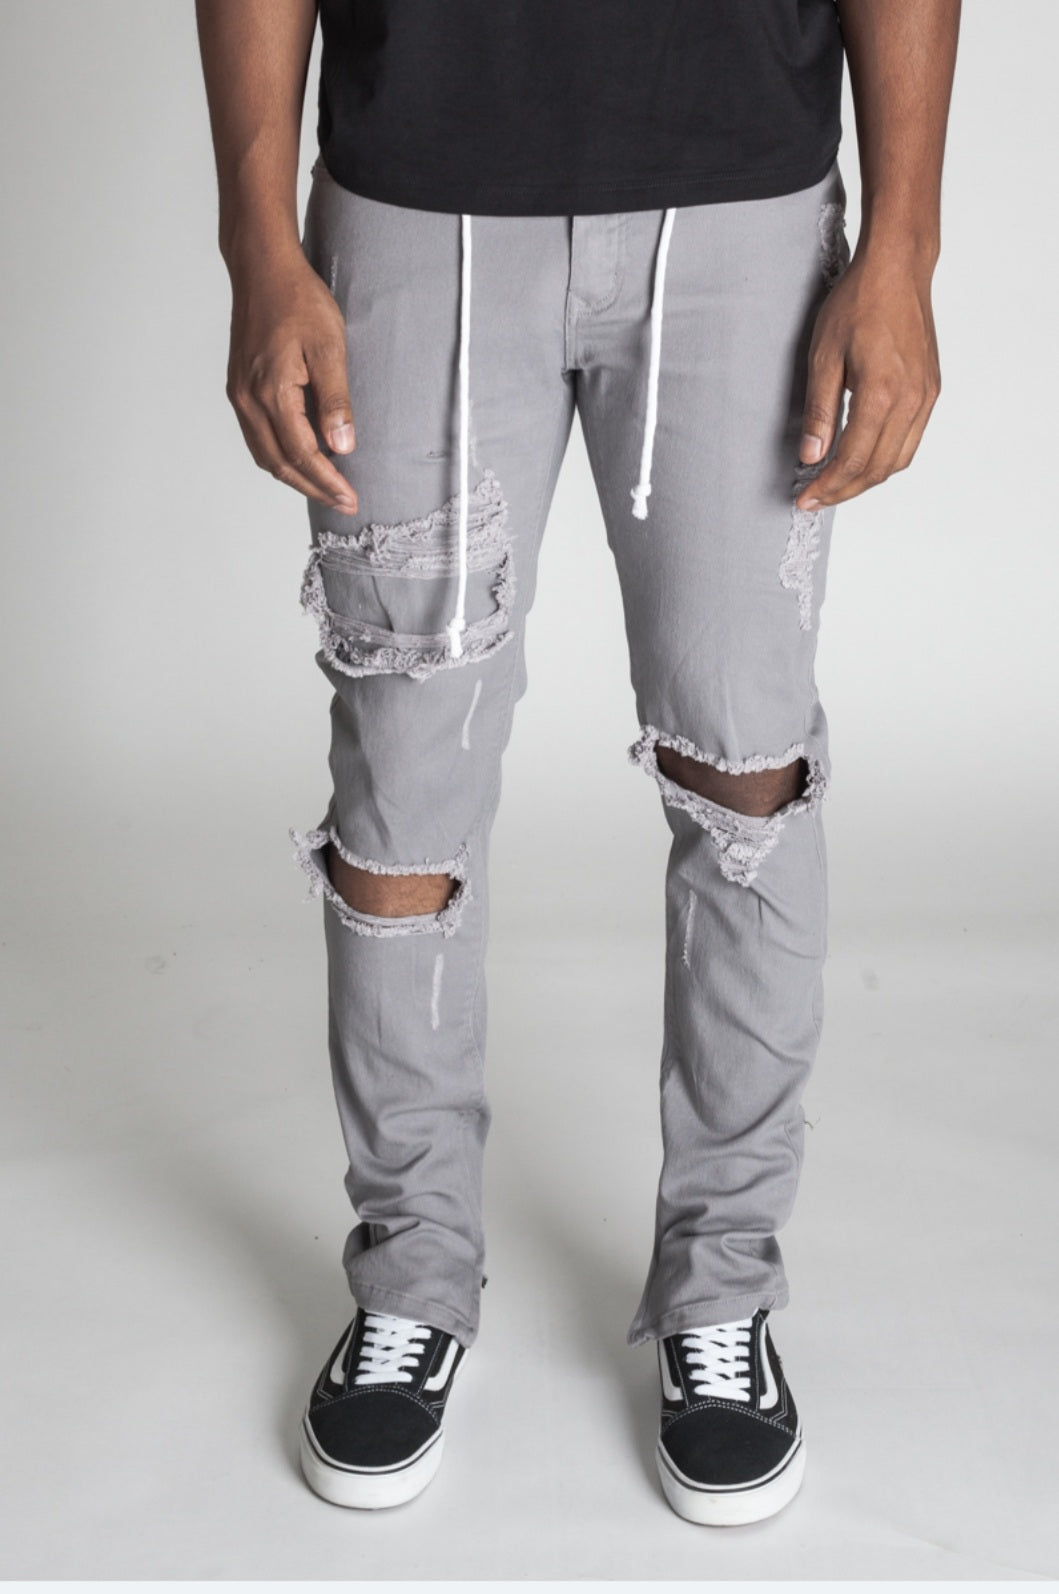 Ankle Zip Pants/Comfort Stretch/Skinny